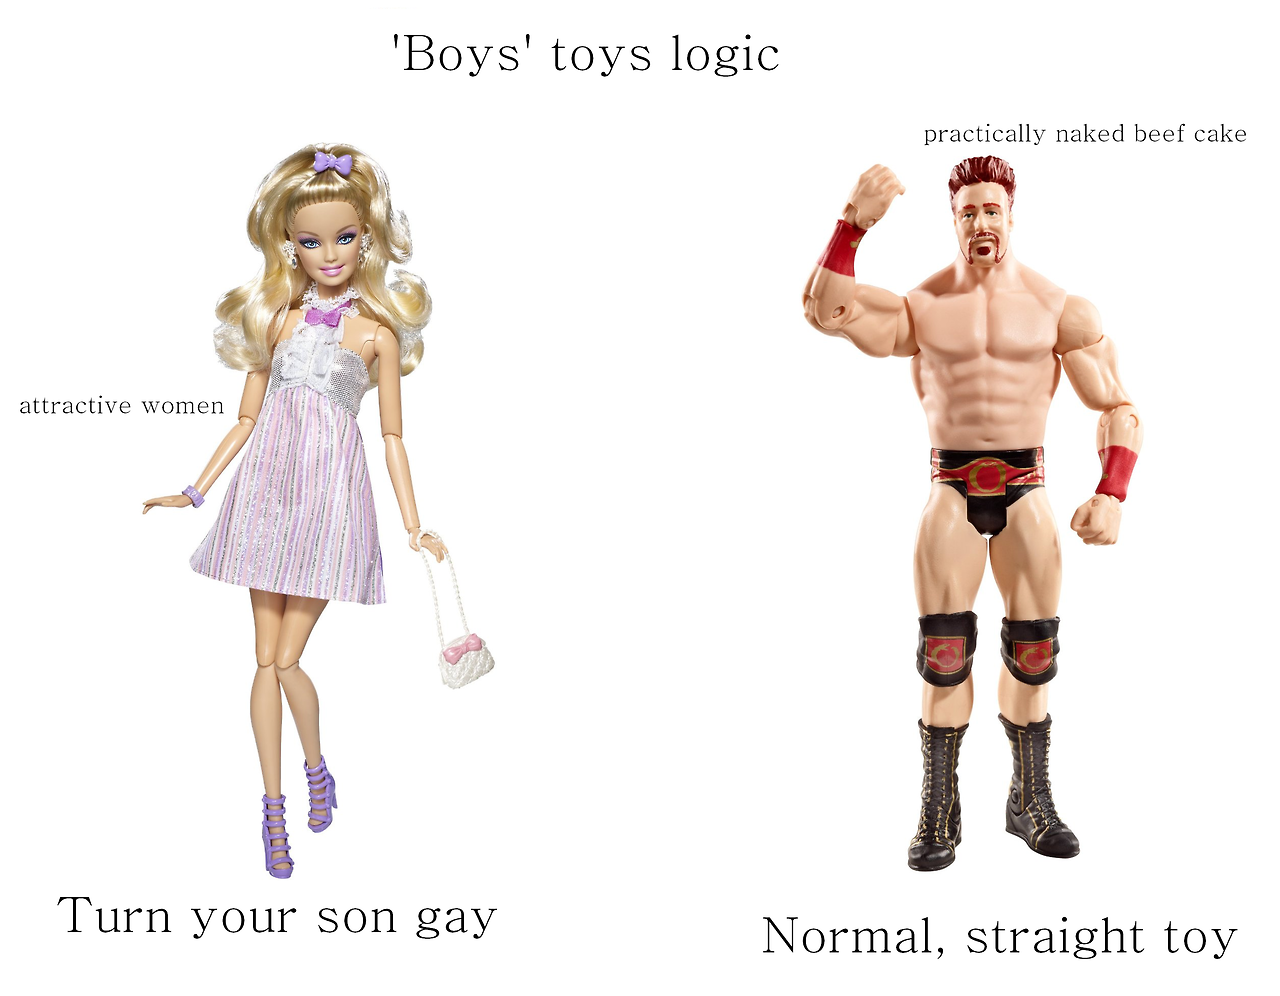 boys toys logic, attractive women turns your son gay, practically naked beef cake, normal straight toy